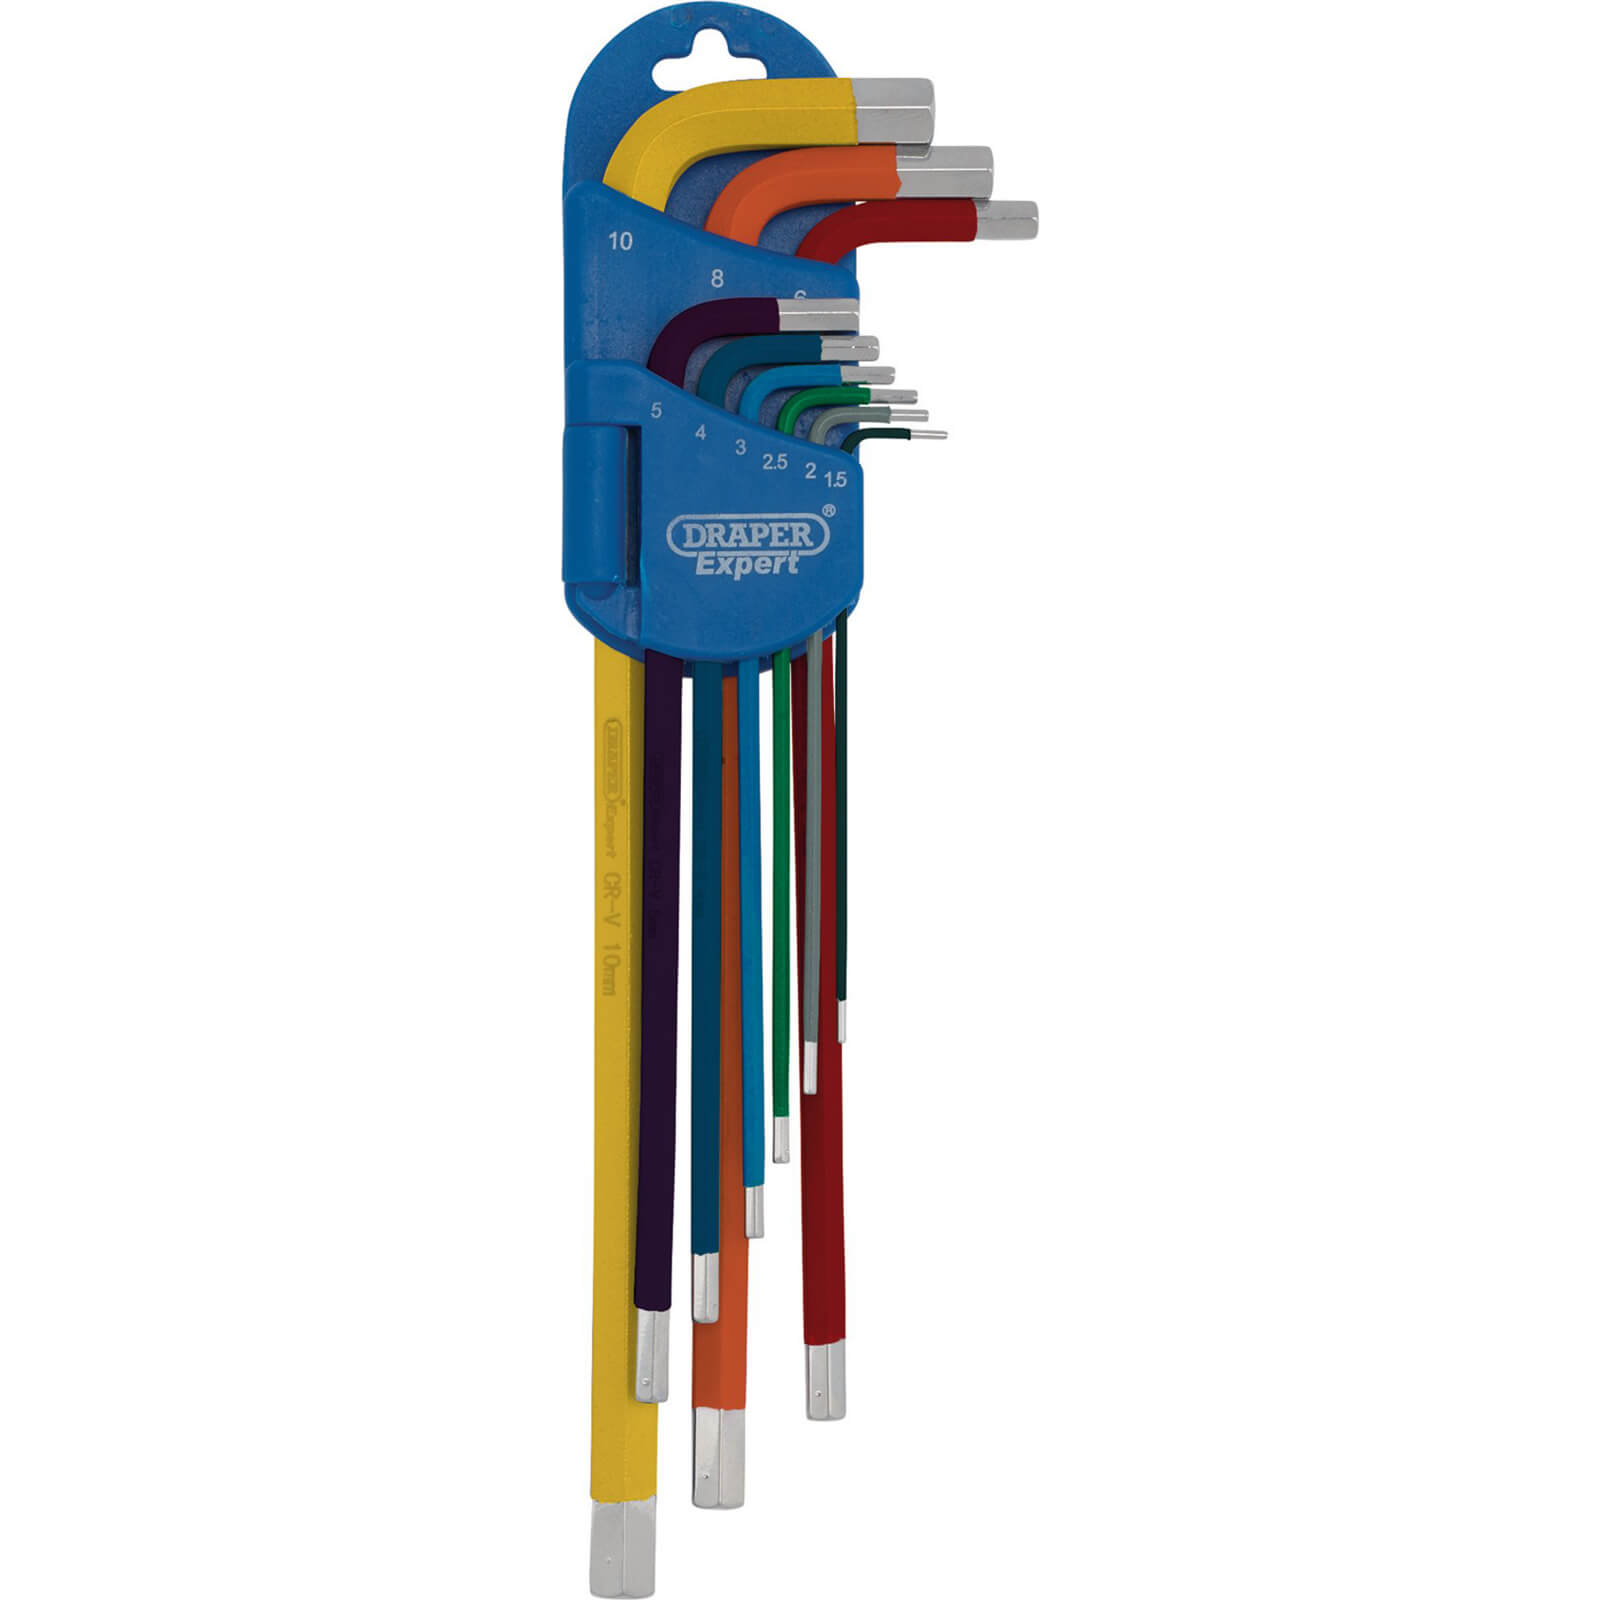 Image of Draper Expert 9 Piece Extra Long Arm Colour Coded Hex Key Set